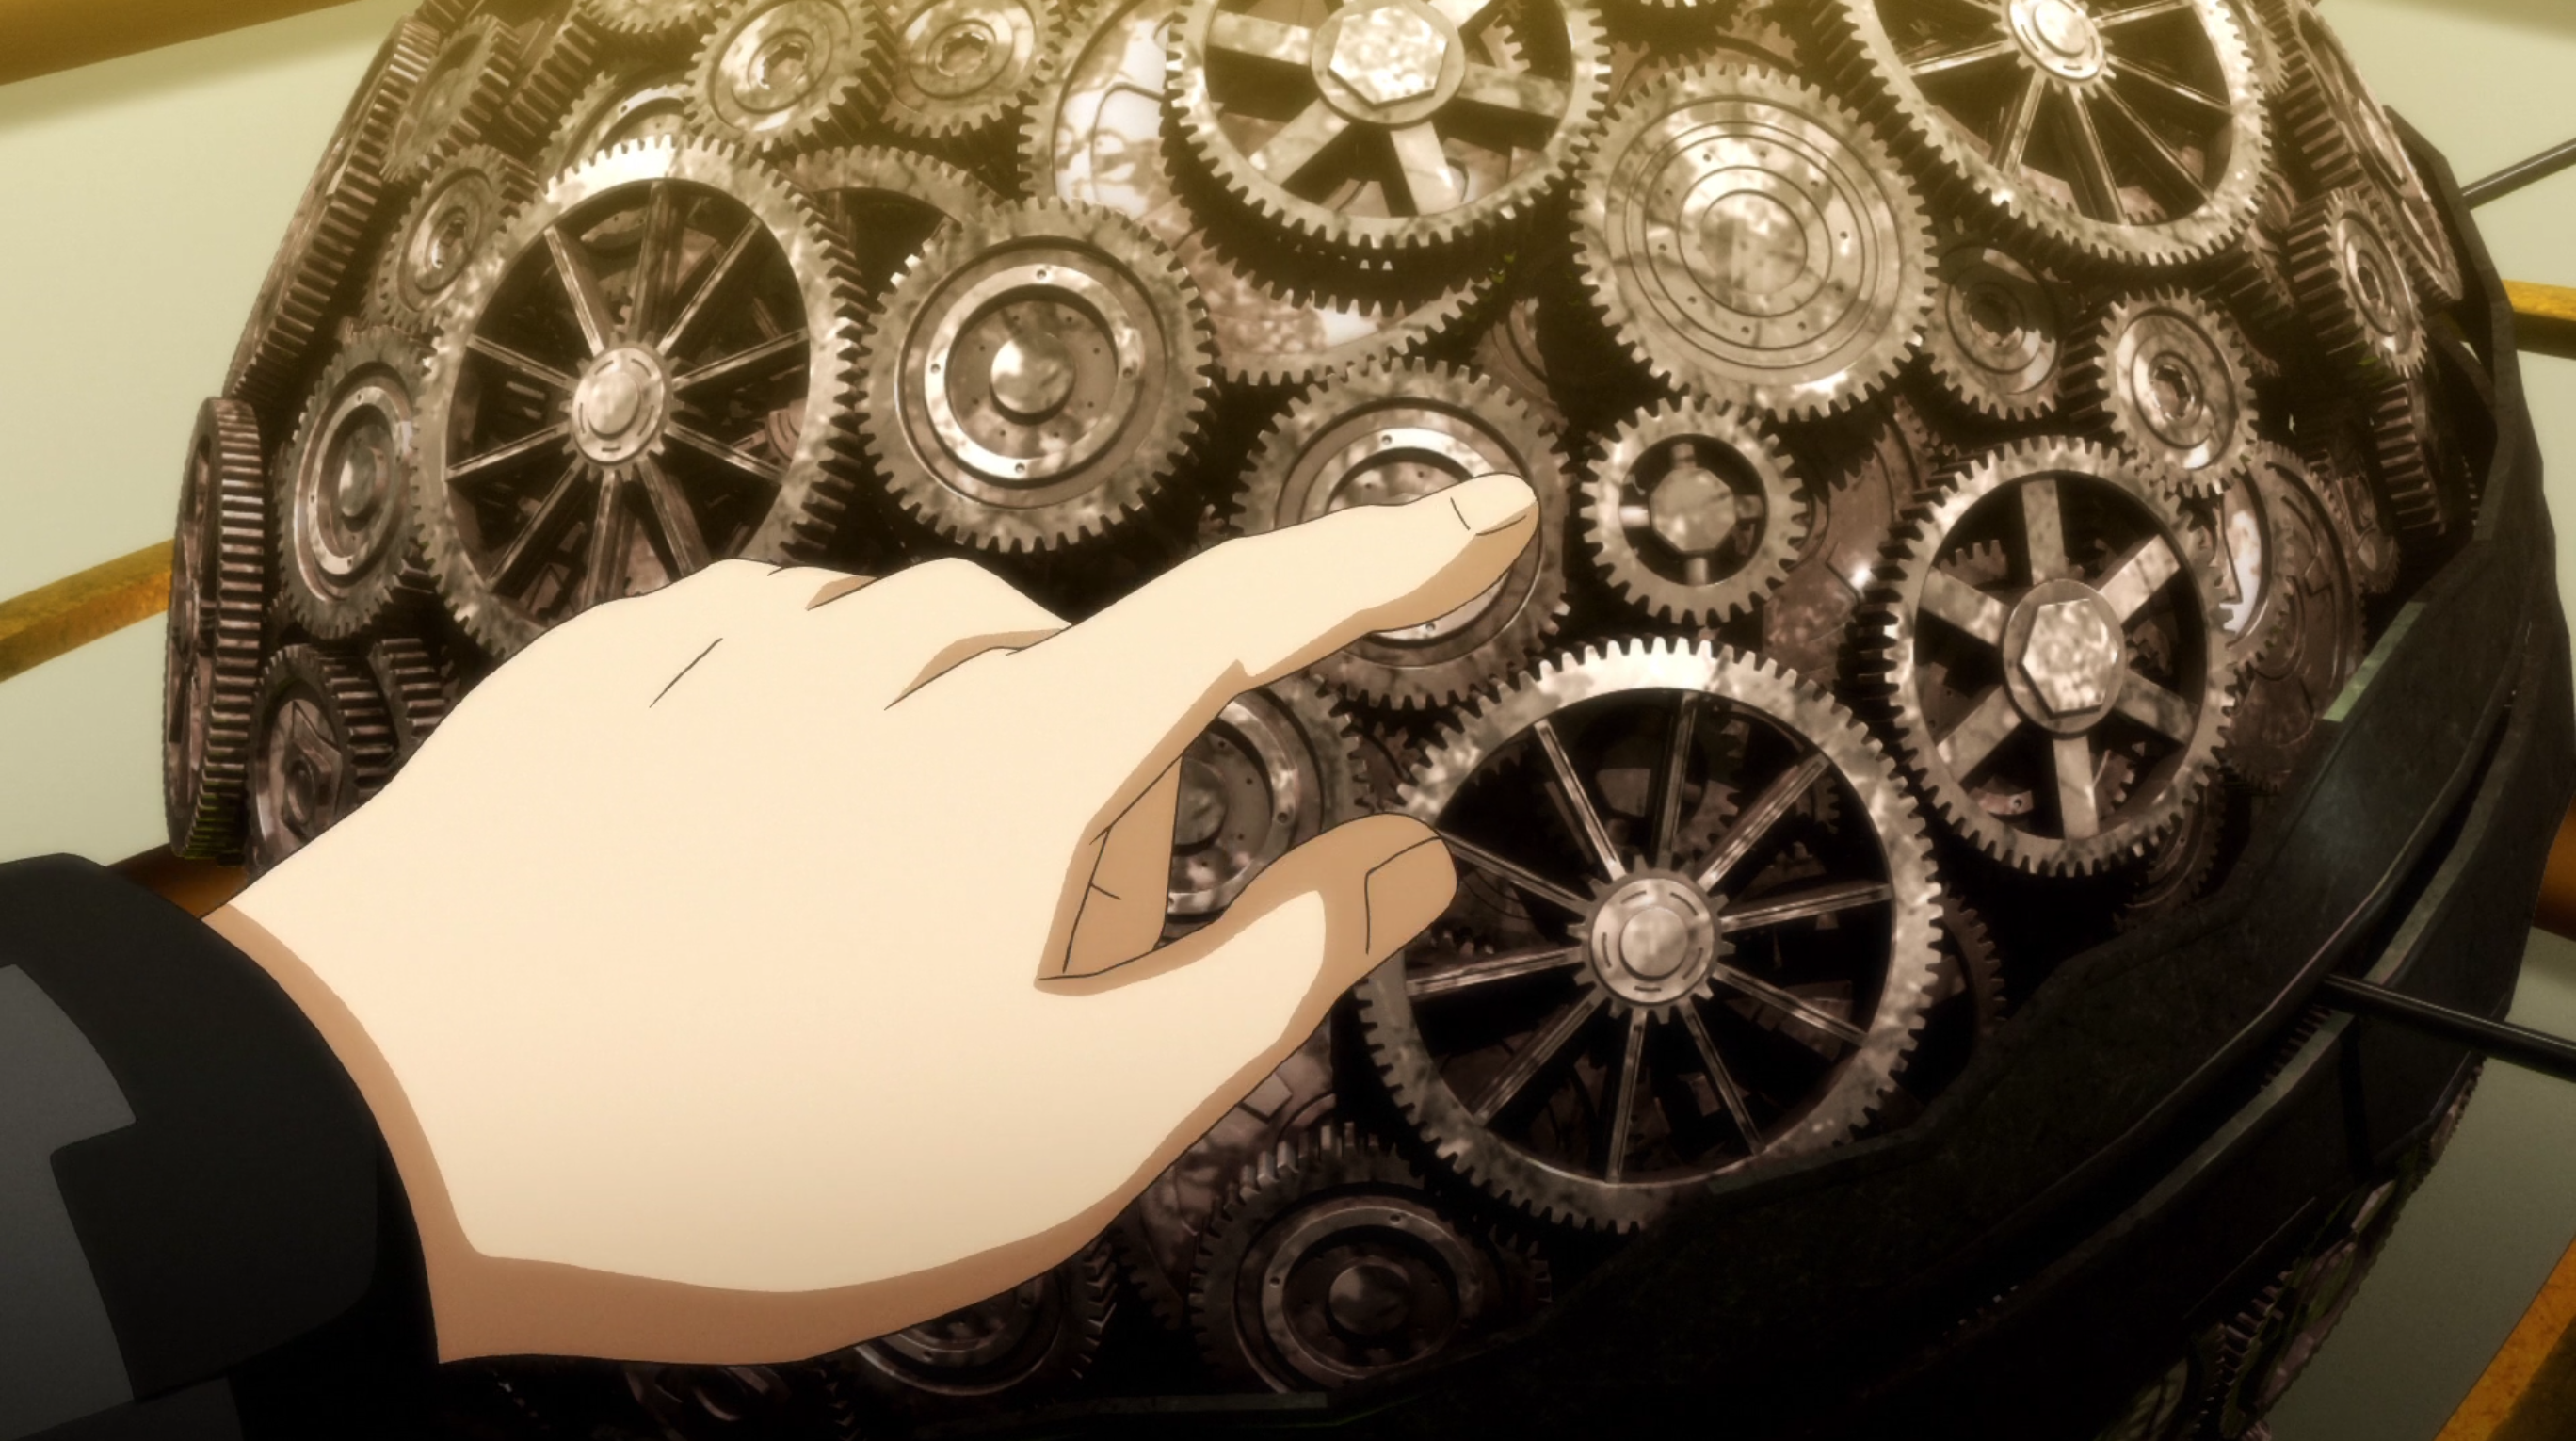 Anime Review: Clockwork Planet & Kado: The Right Answer